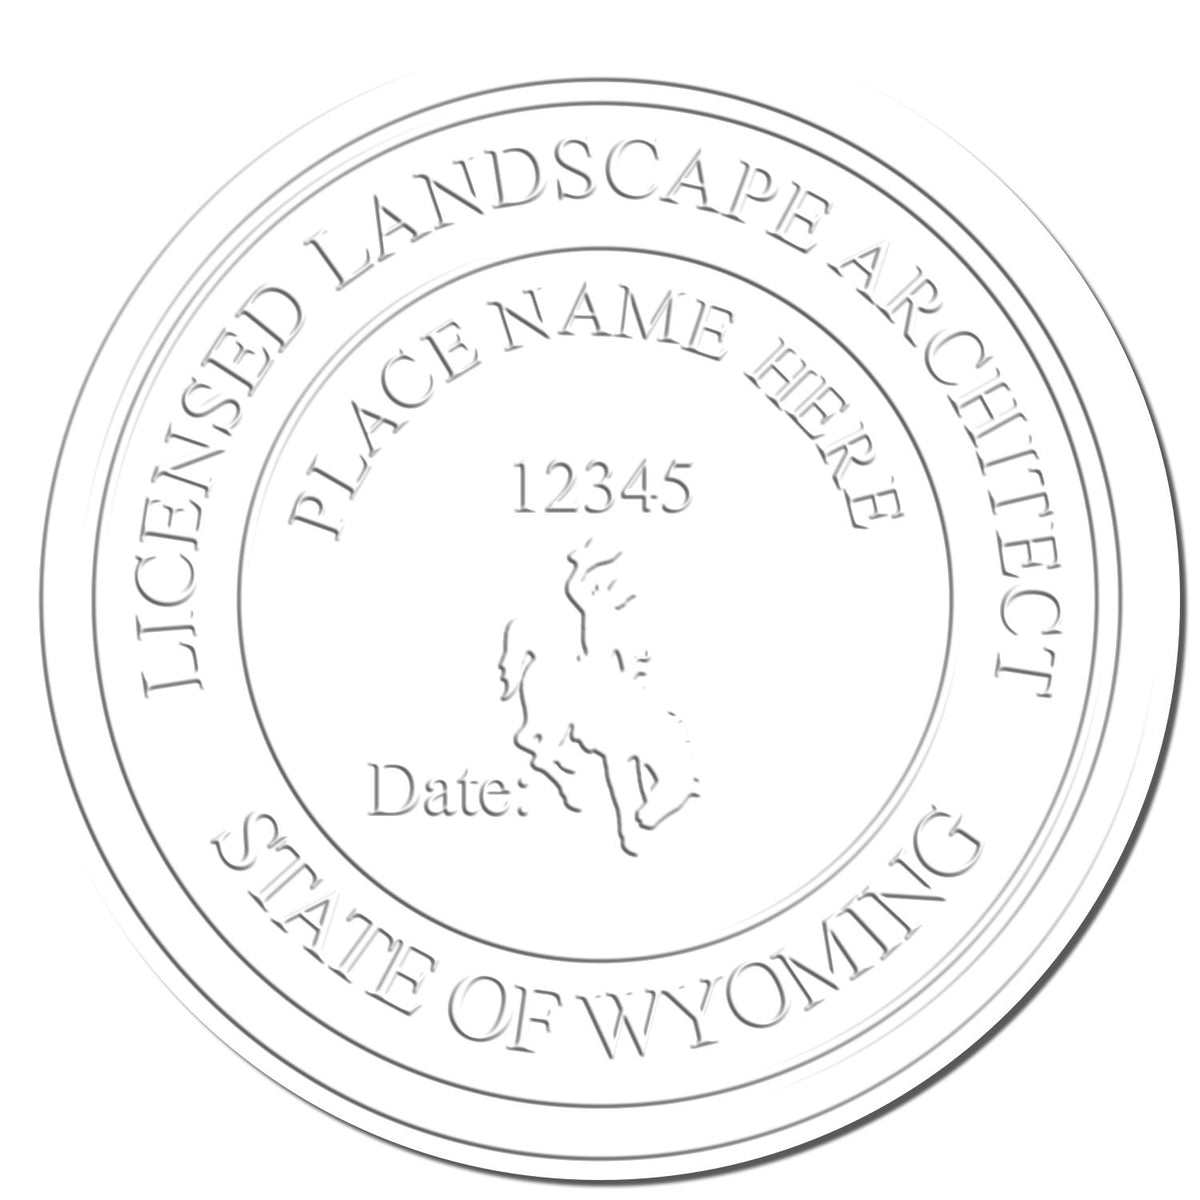 This paper is stamped with a sample imprint of the Gift Wyoming Landscape Architect Seal, signifying its quality and reliability.